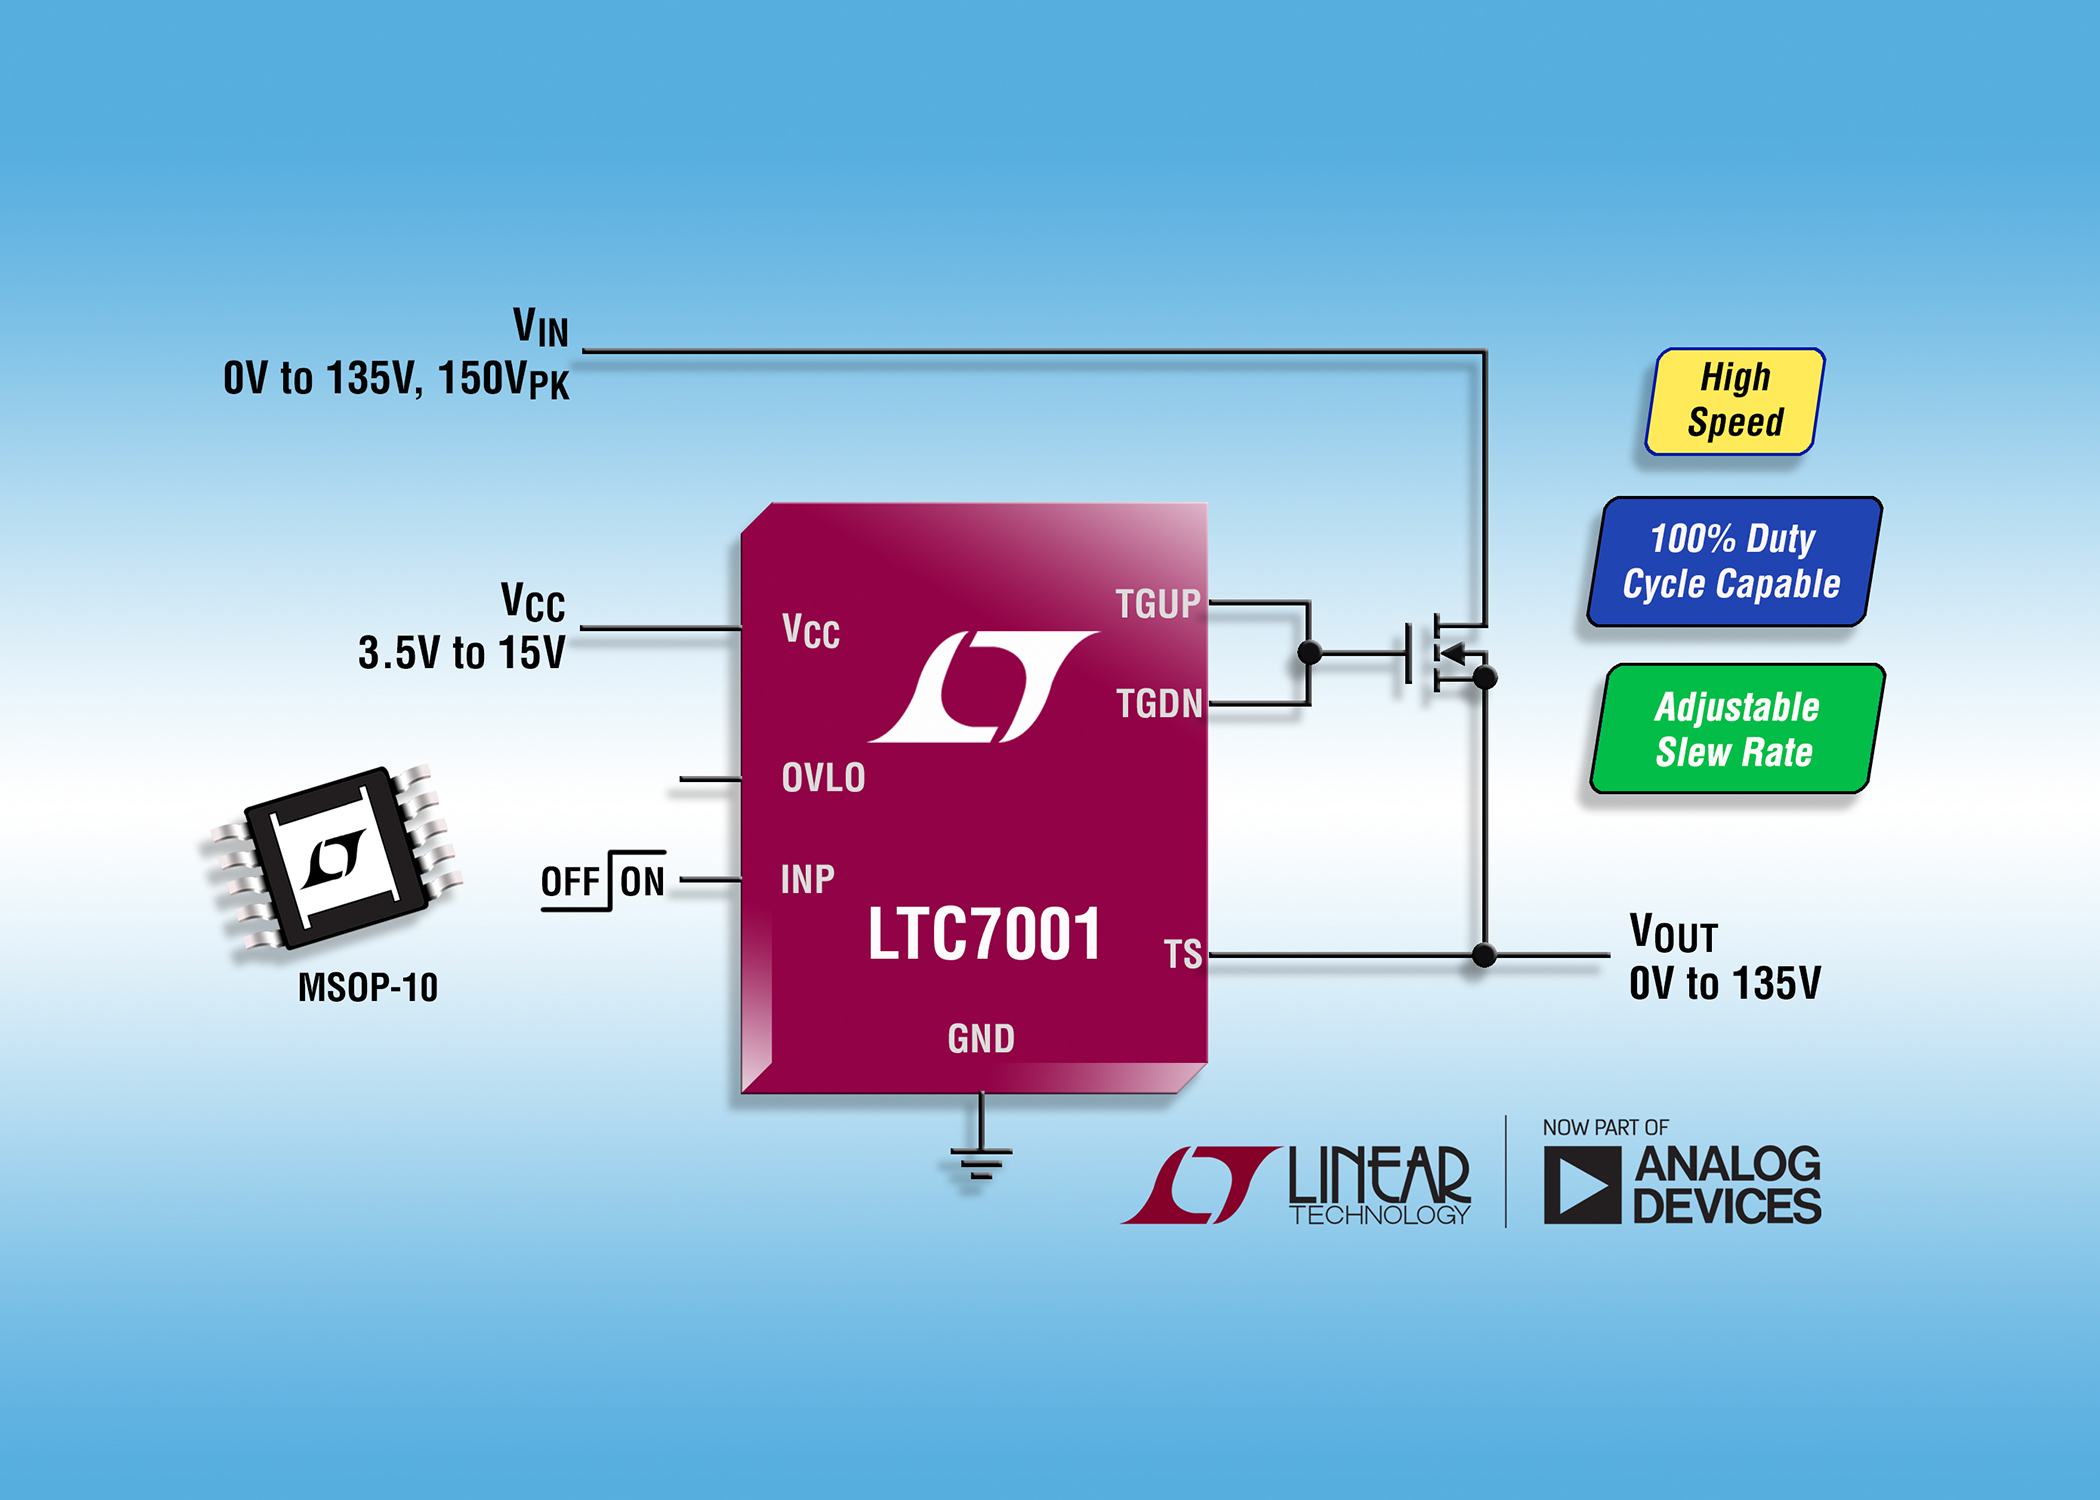 N-channel MOSFET driver provides 100 per cent duty cycle capability